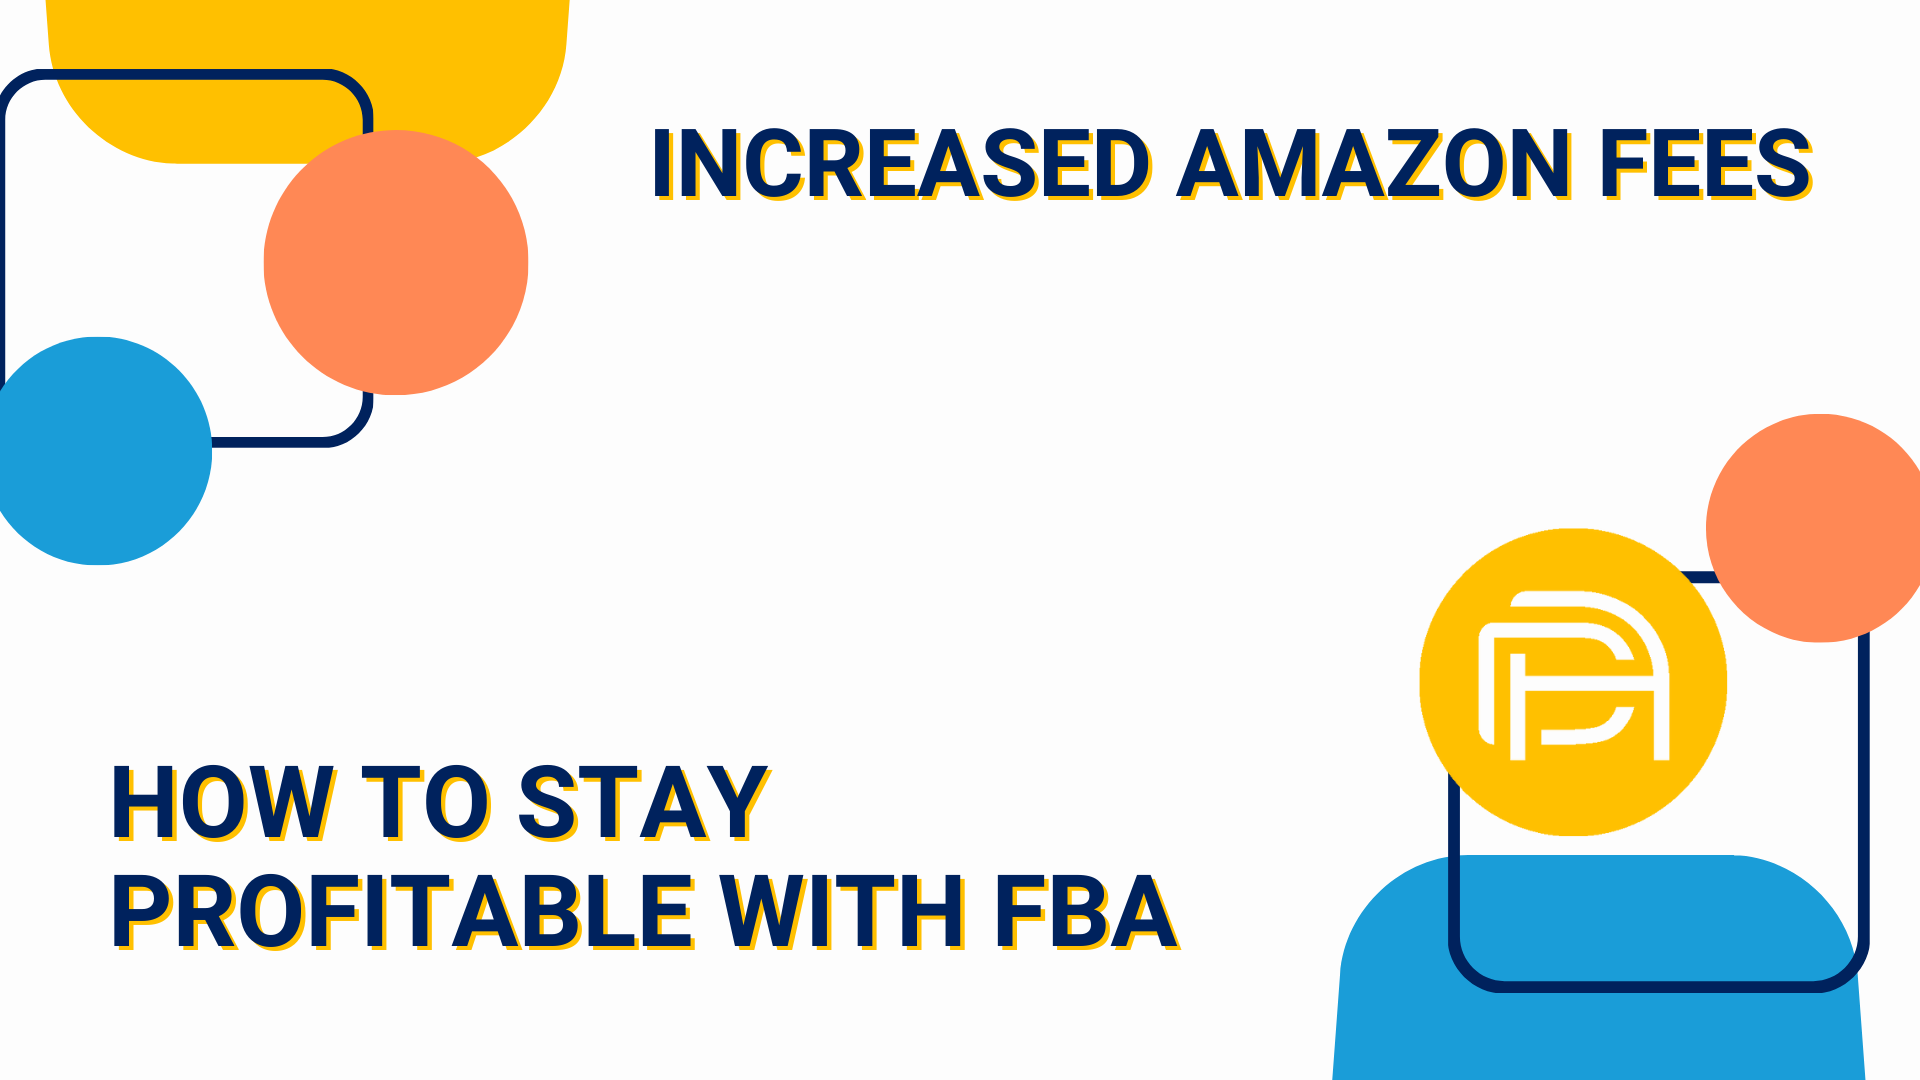 Increased Amazon Fees – How to Stay Profitable with FBA